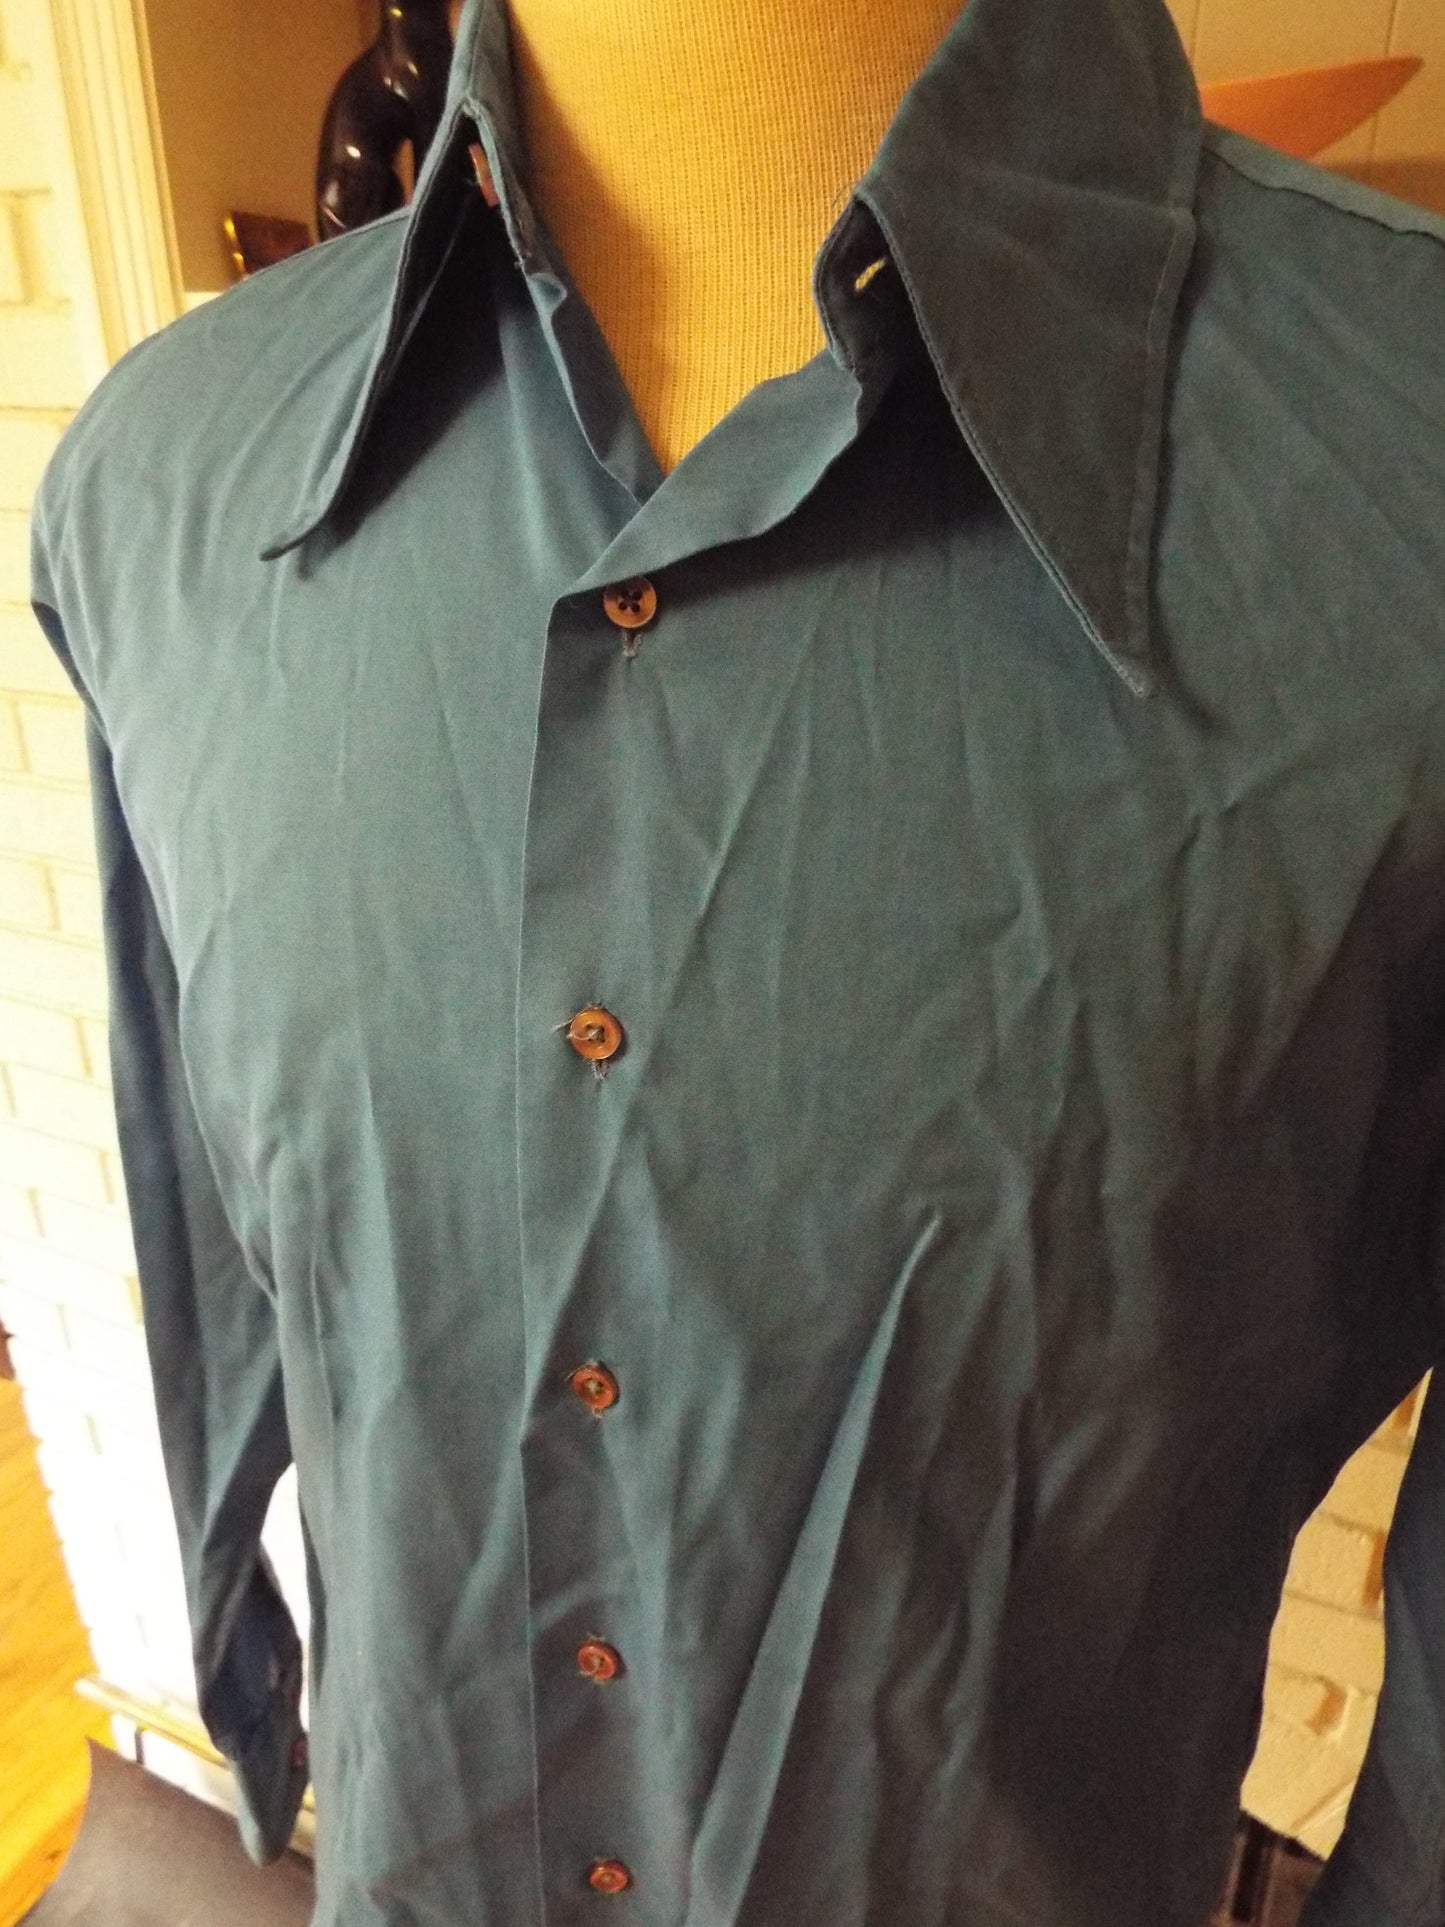 Vintage Button Down Long Sleeve Shirt by KMart